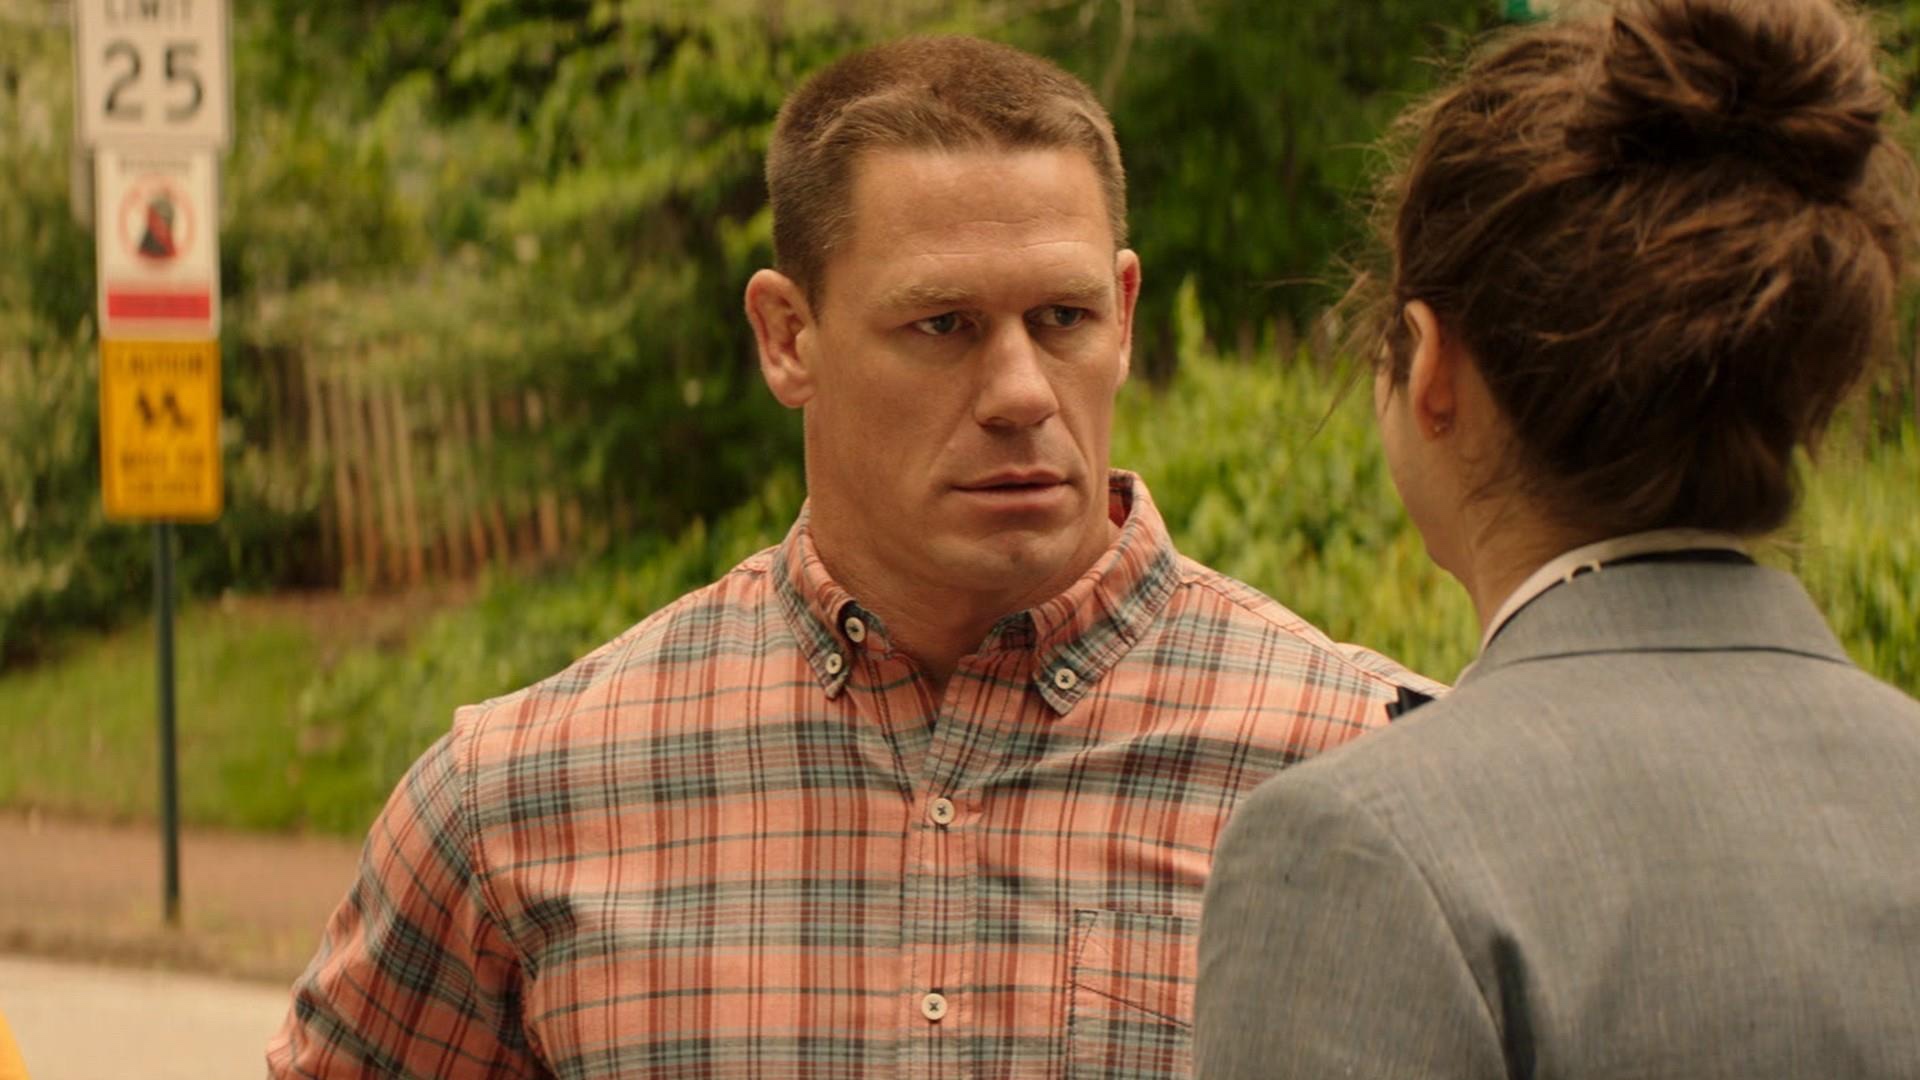 John Cena Will Meet His Match In His New Film Project Playing With